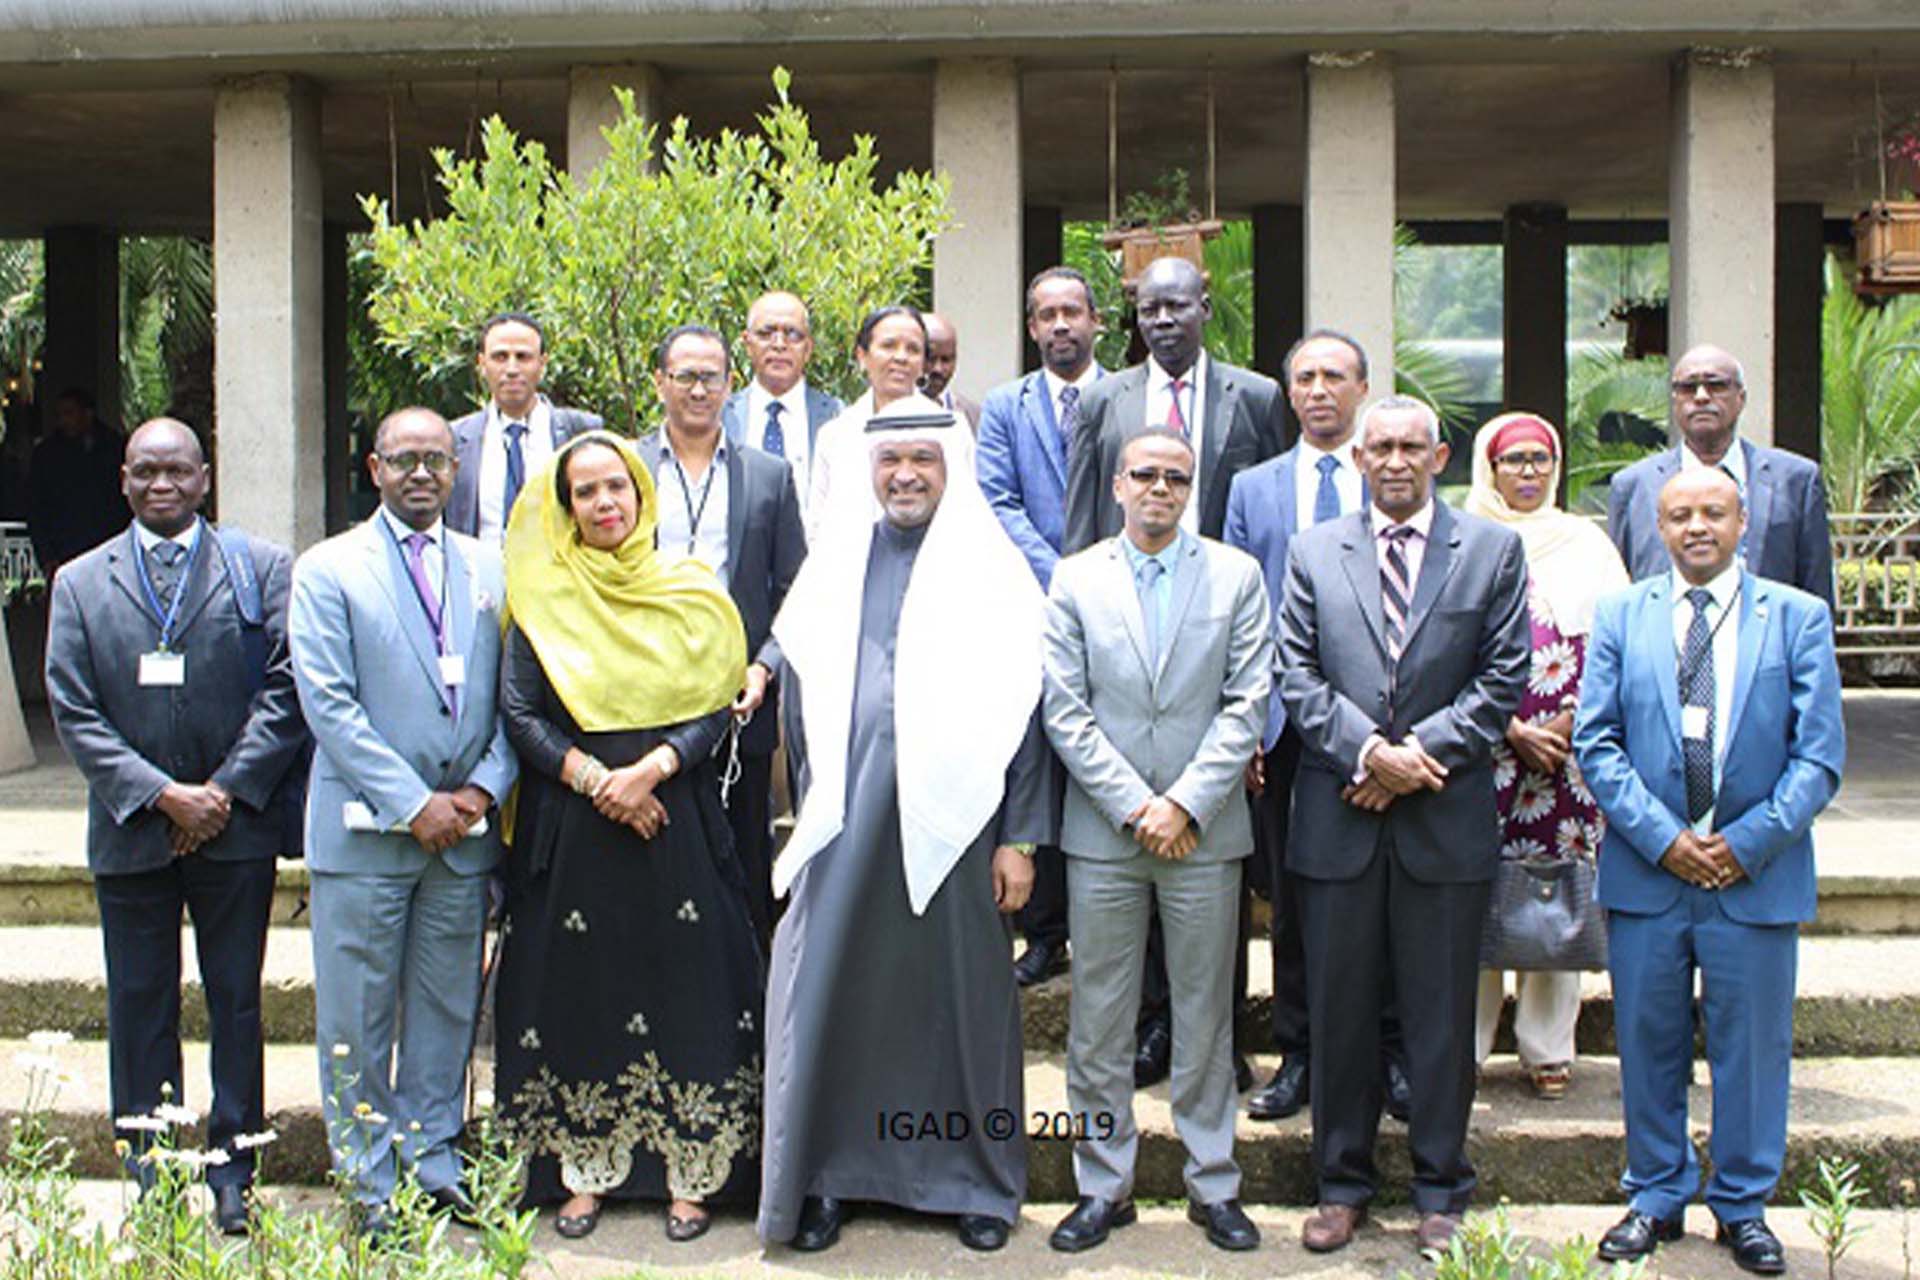 IGAD On its Way to Establishing a Regional Cancer Centre